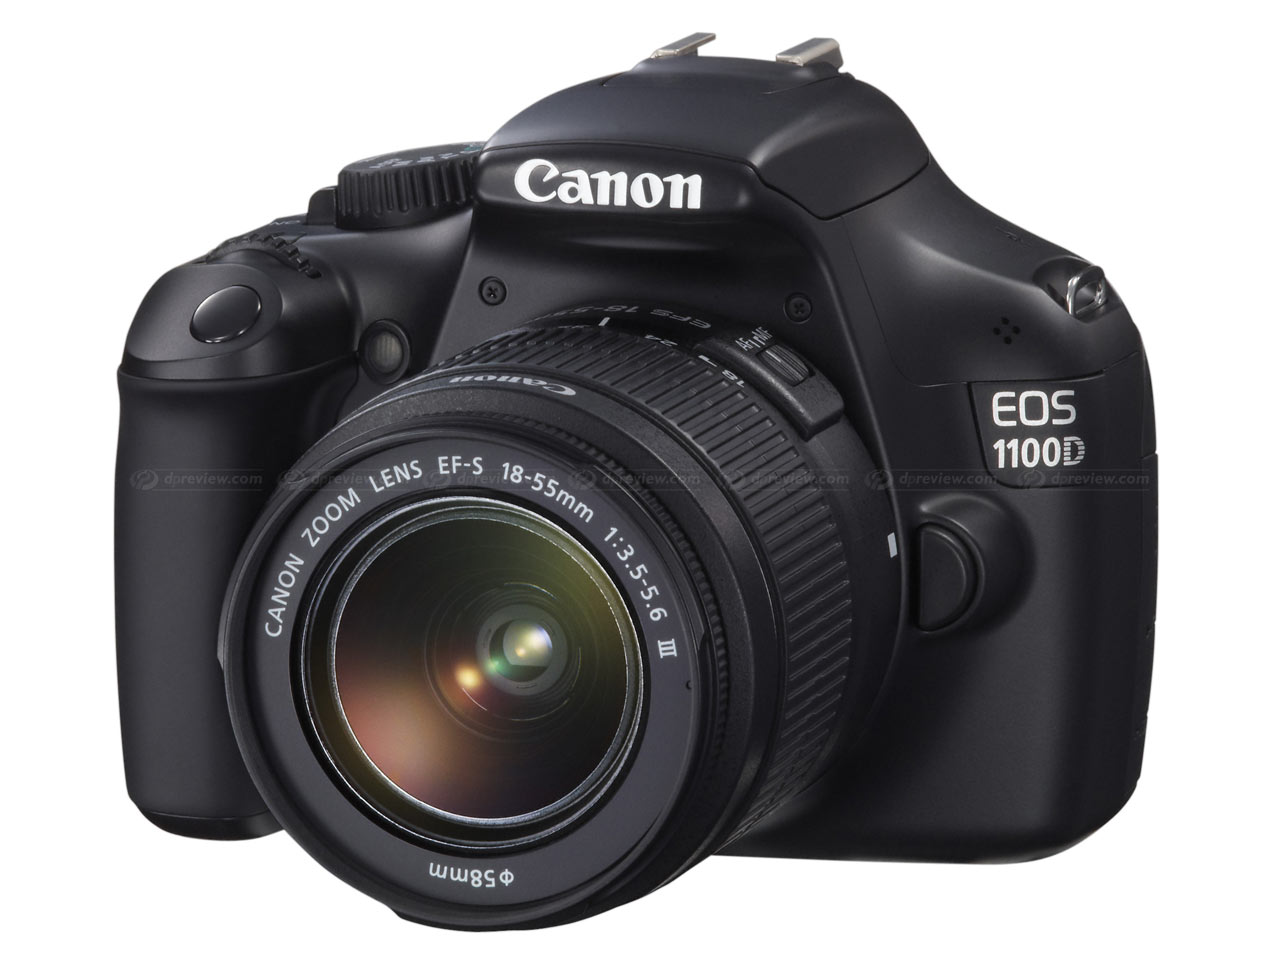 Boxed Canon EOS 1100D DSLR Camera with 18-55mm Kit Lens large image 0